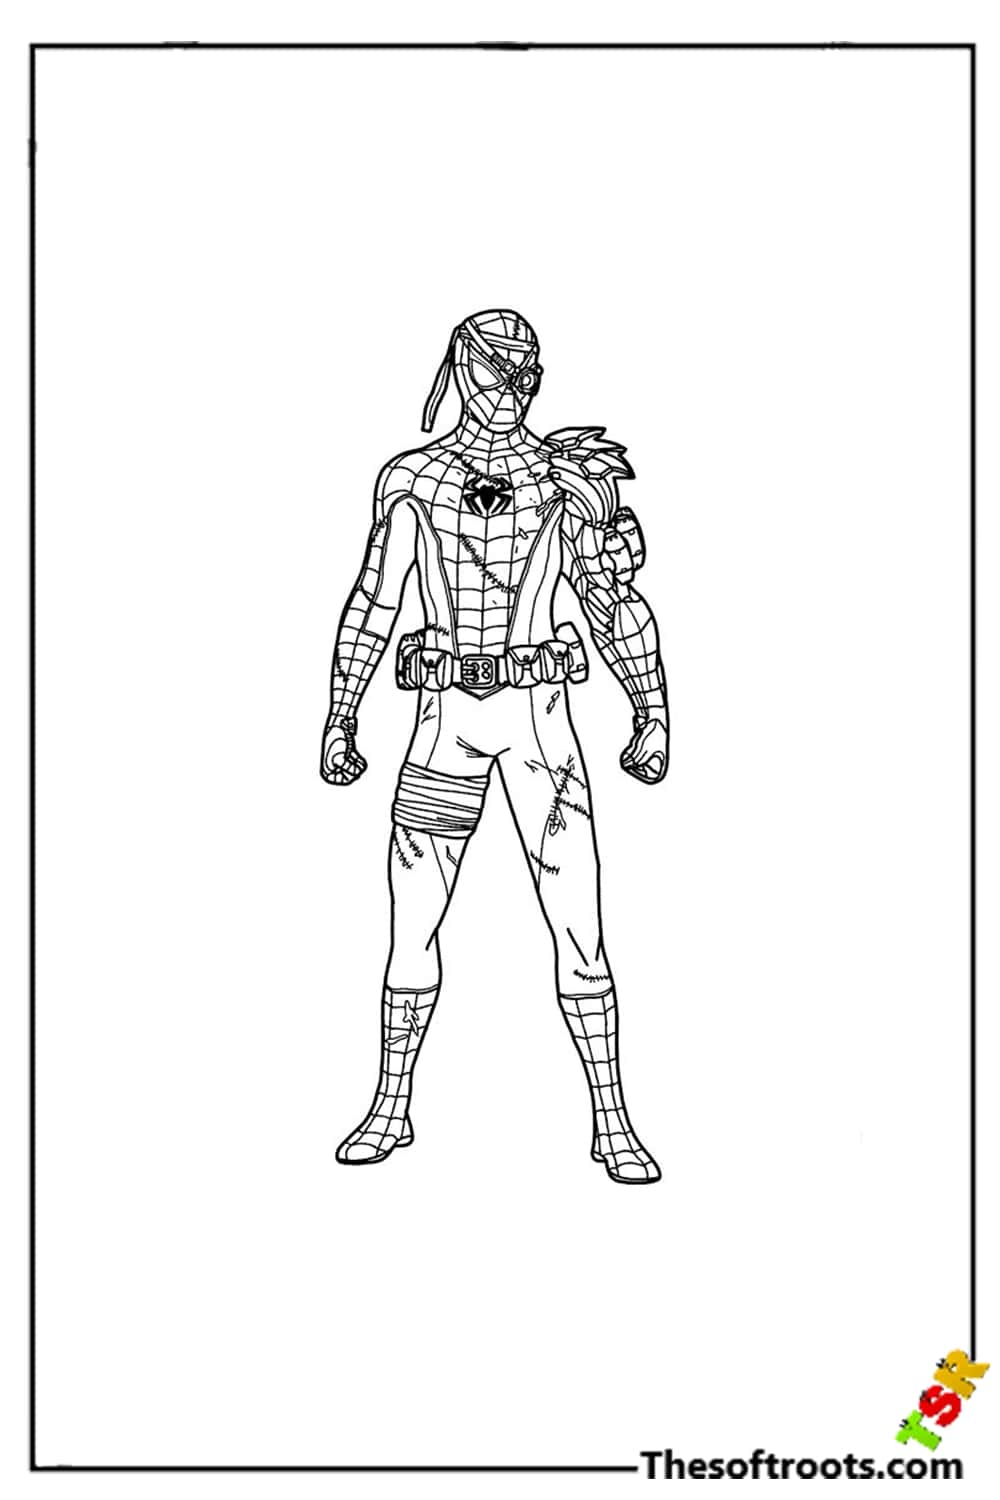 Robot Spiderman coloring pages